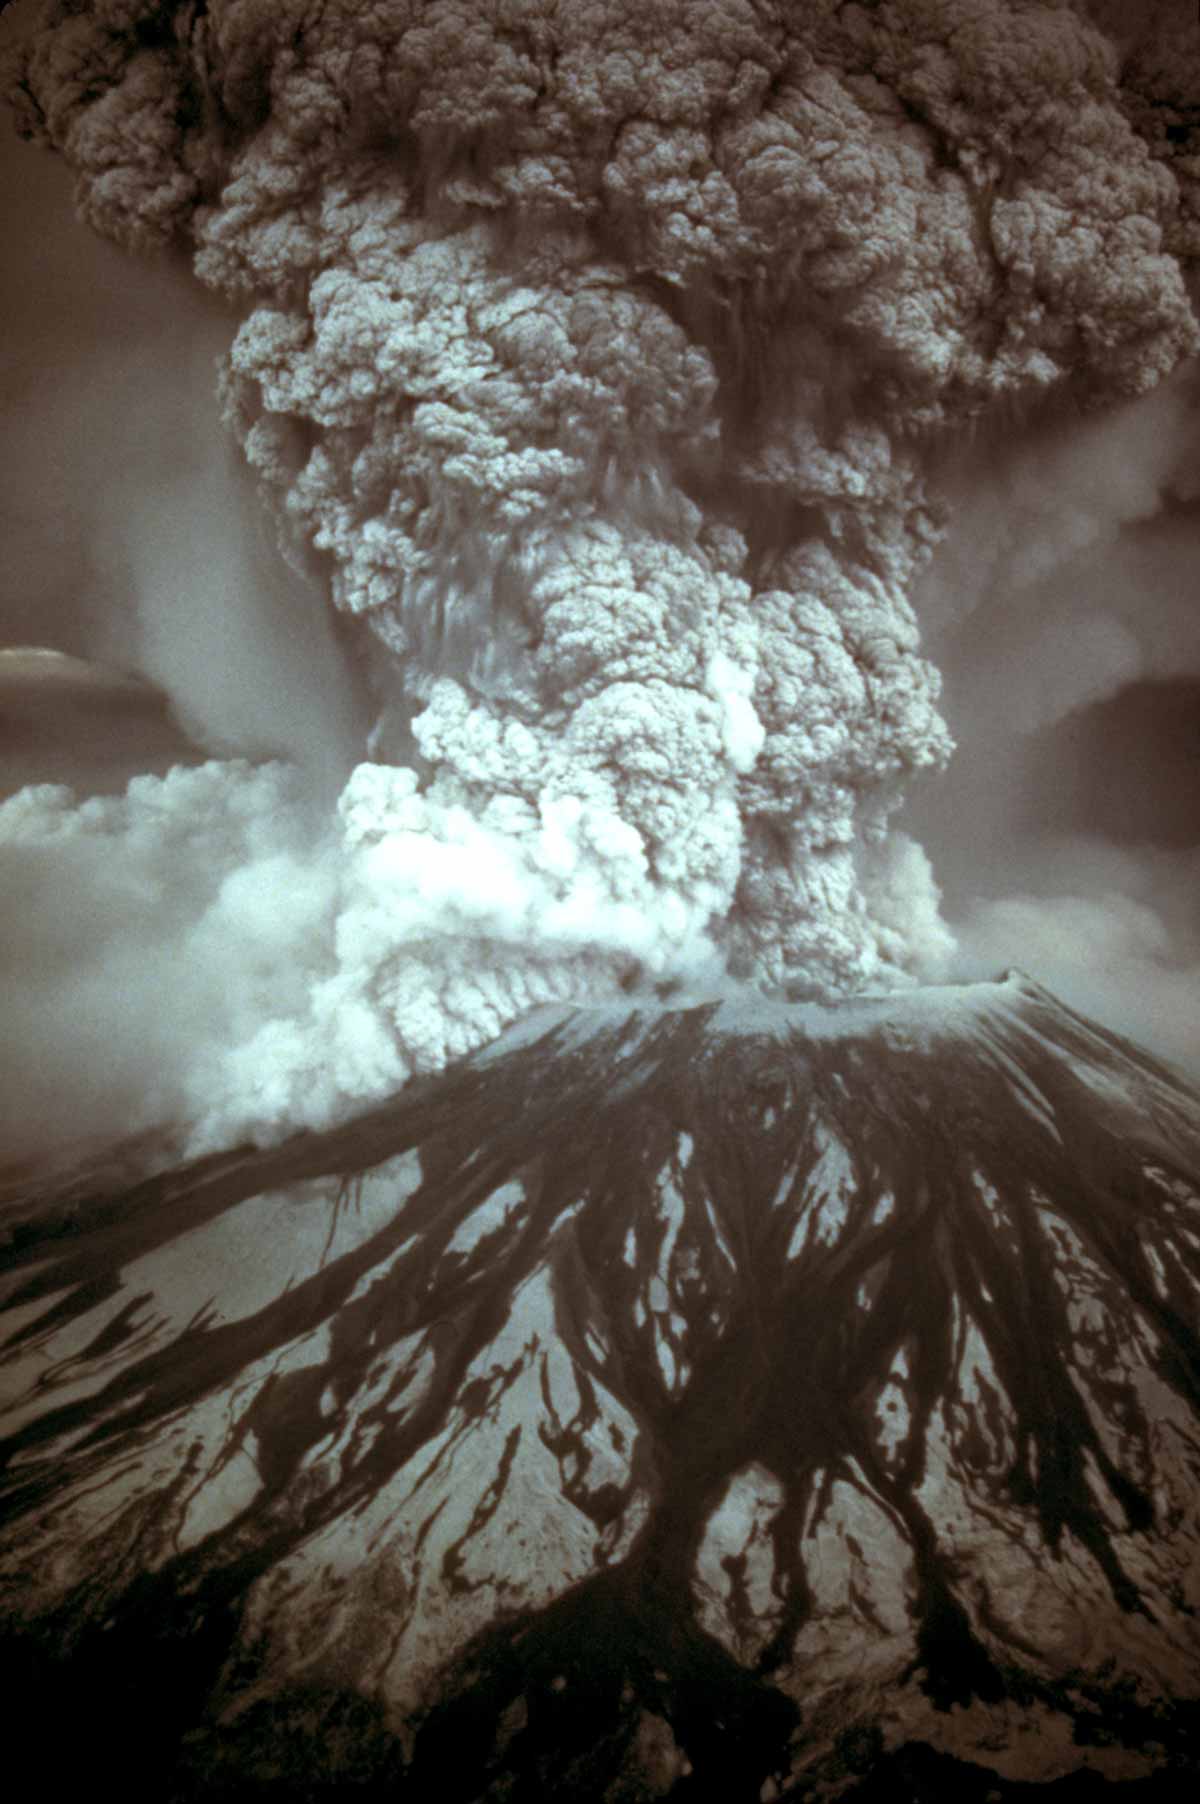 The eruption of Mount Saint Helens in 1980